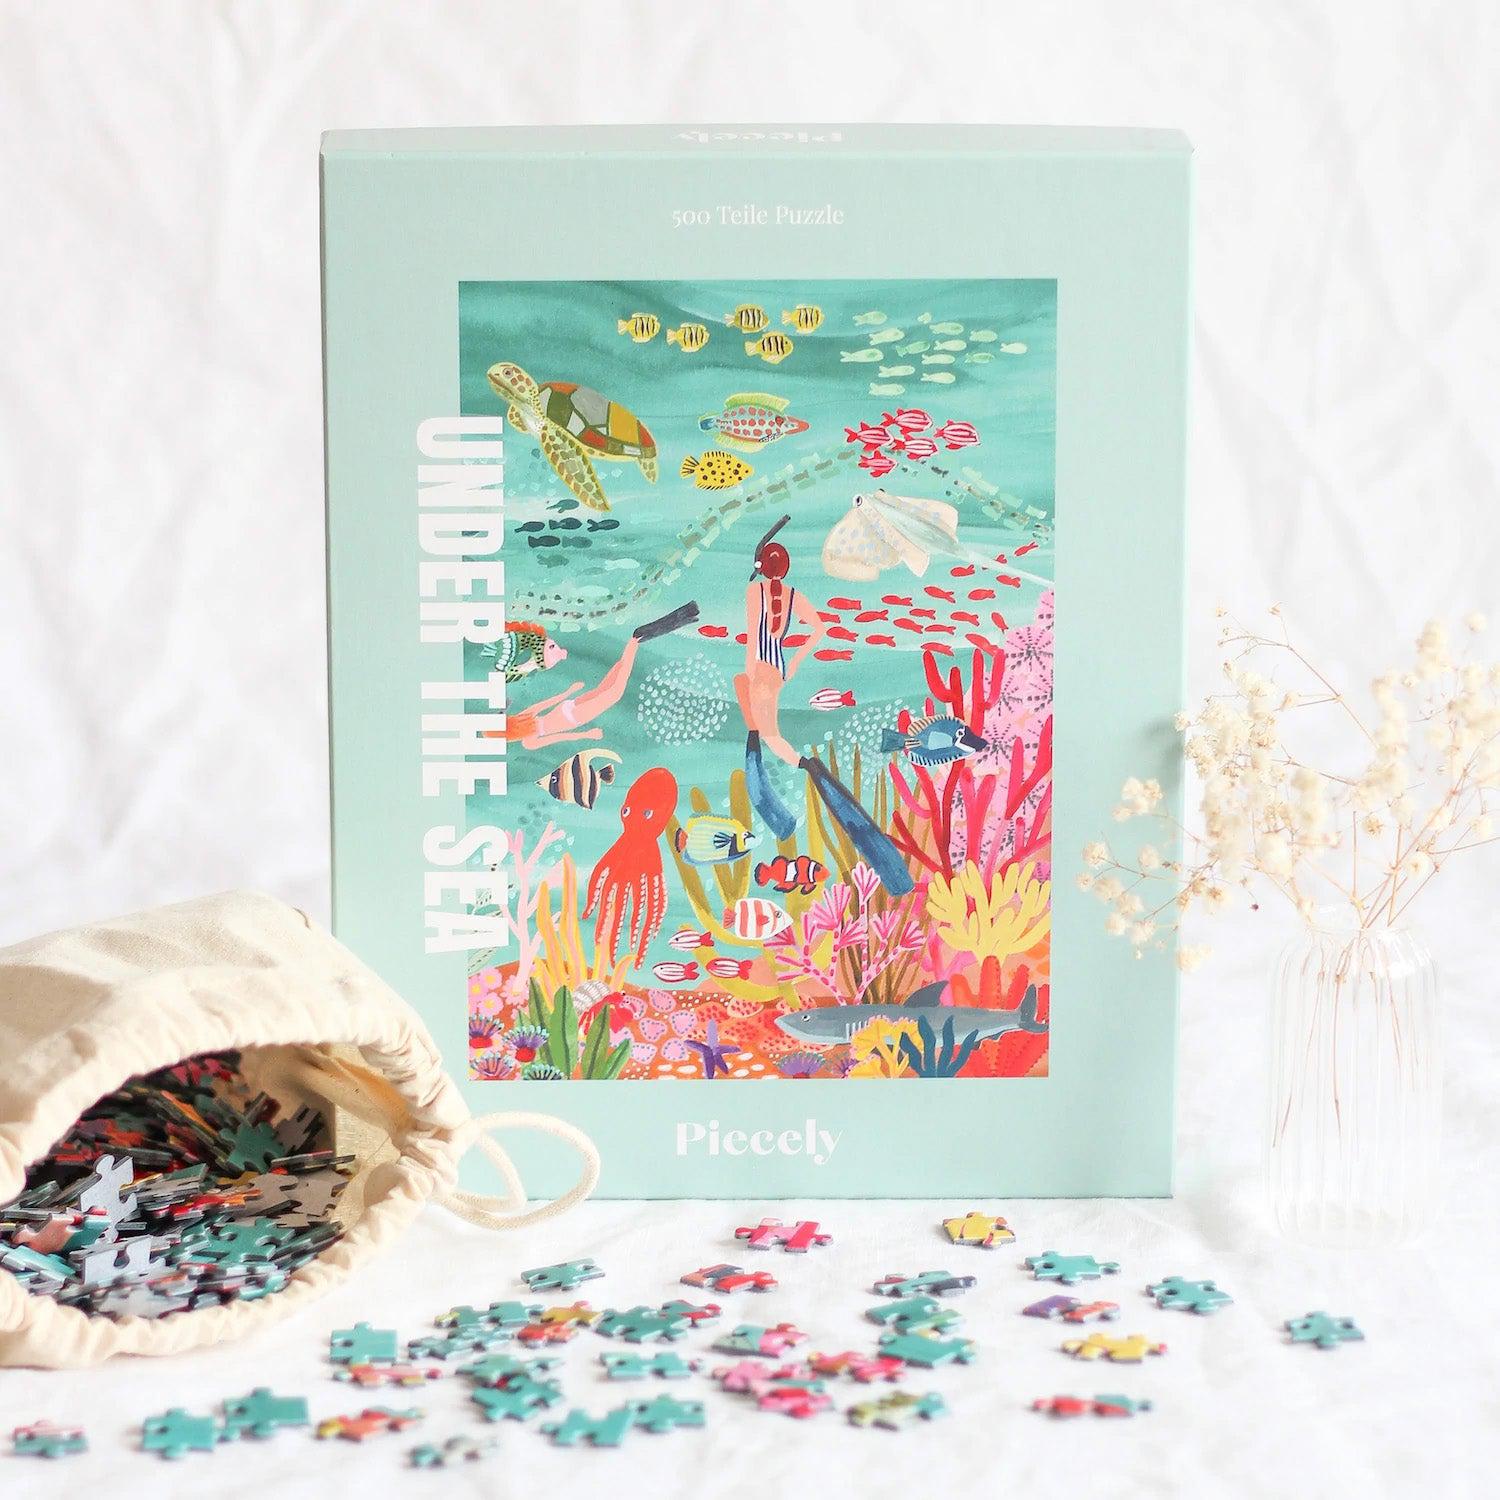 Puzzle Under the sea - Rhi JAMES Piecely